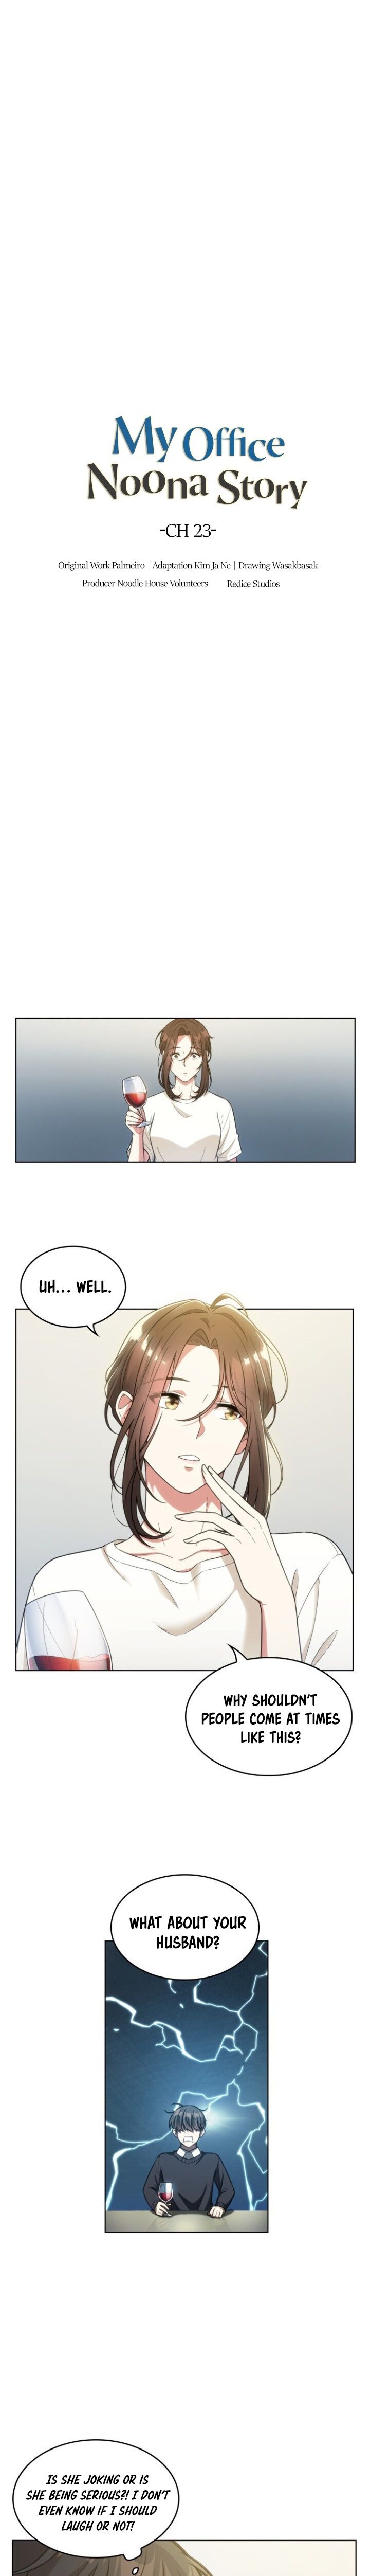 My Office Noona’s Story - Chapter 23 Page 3